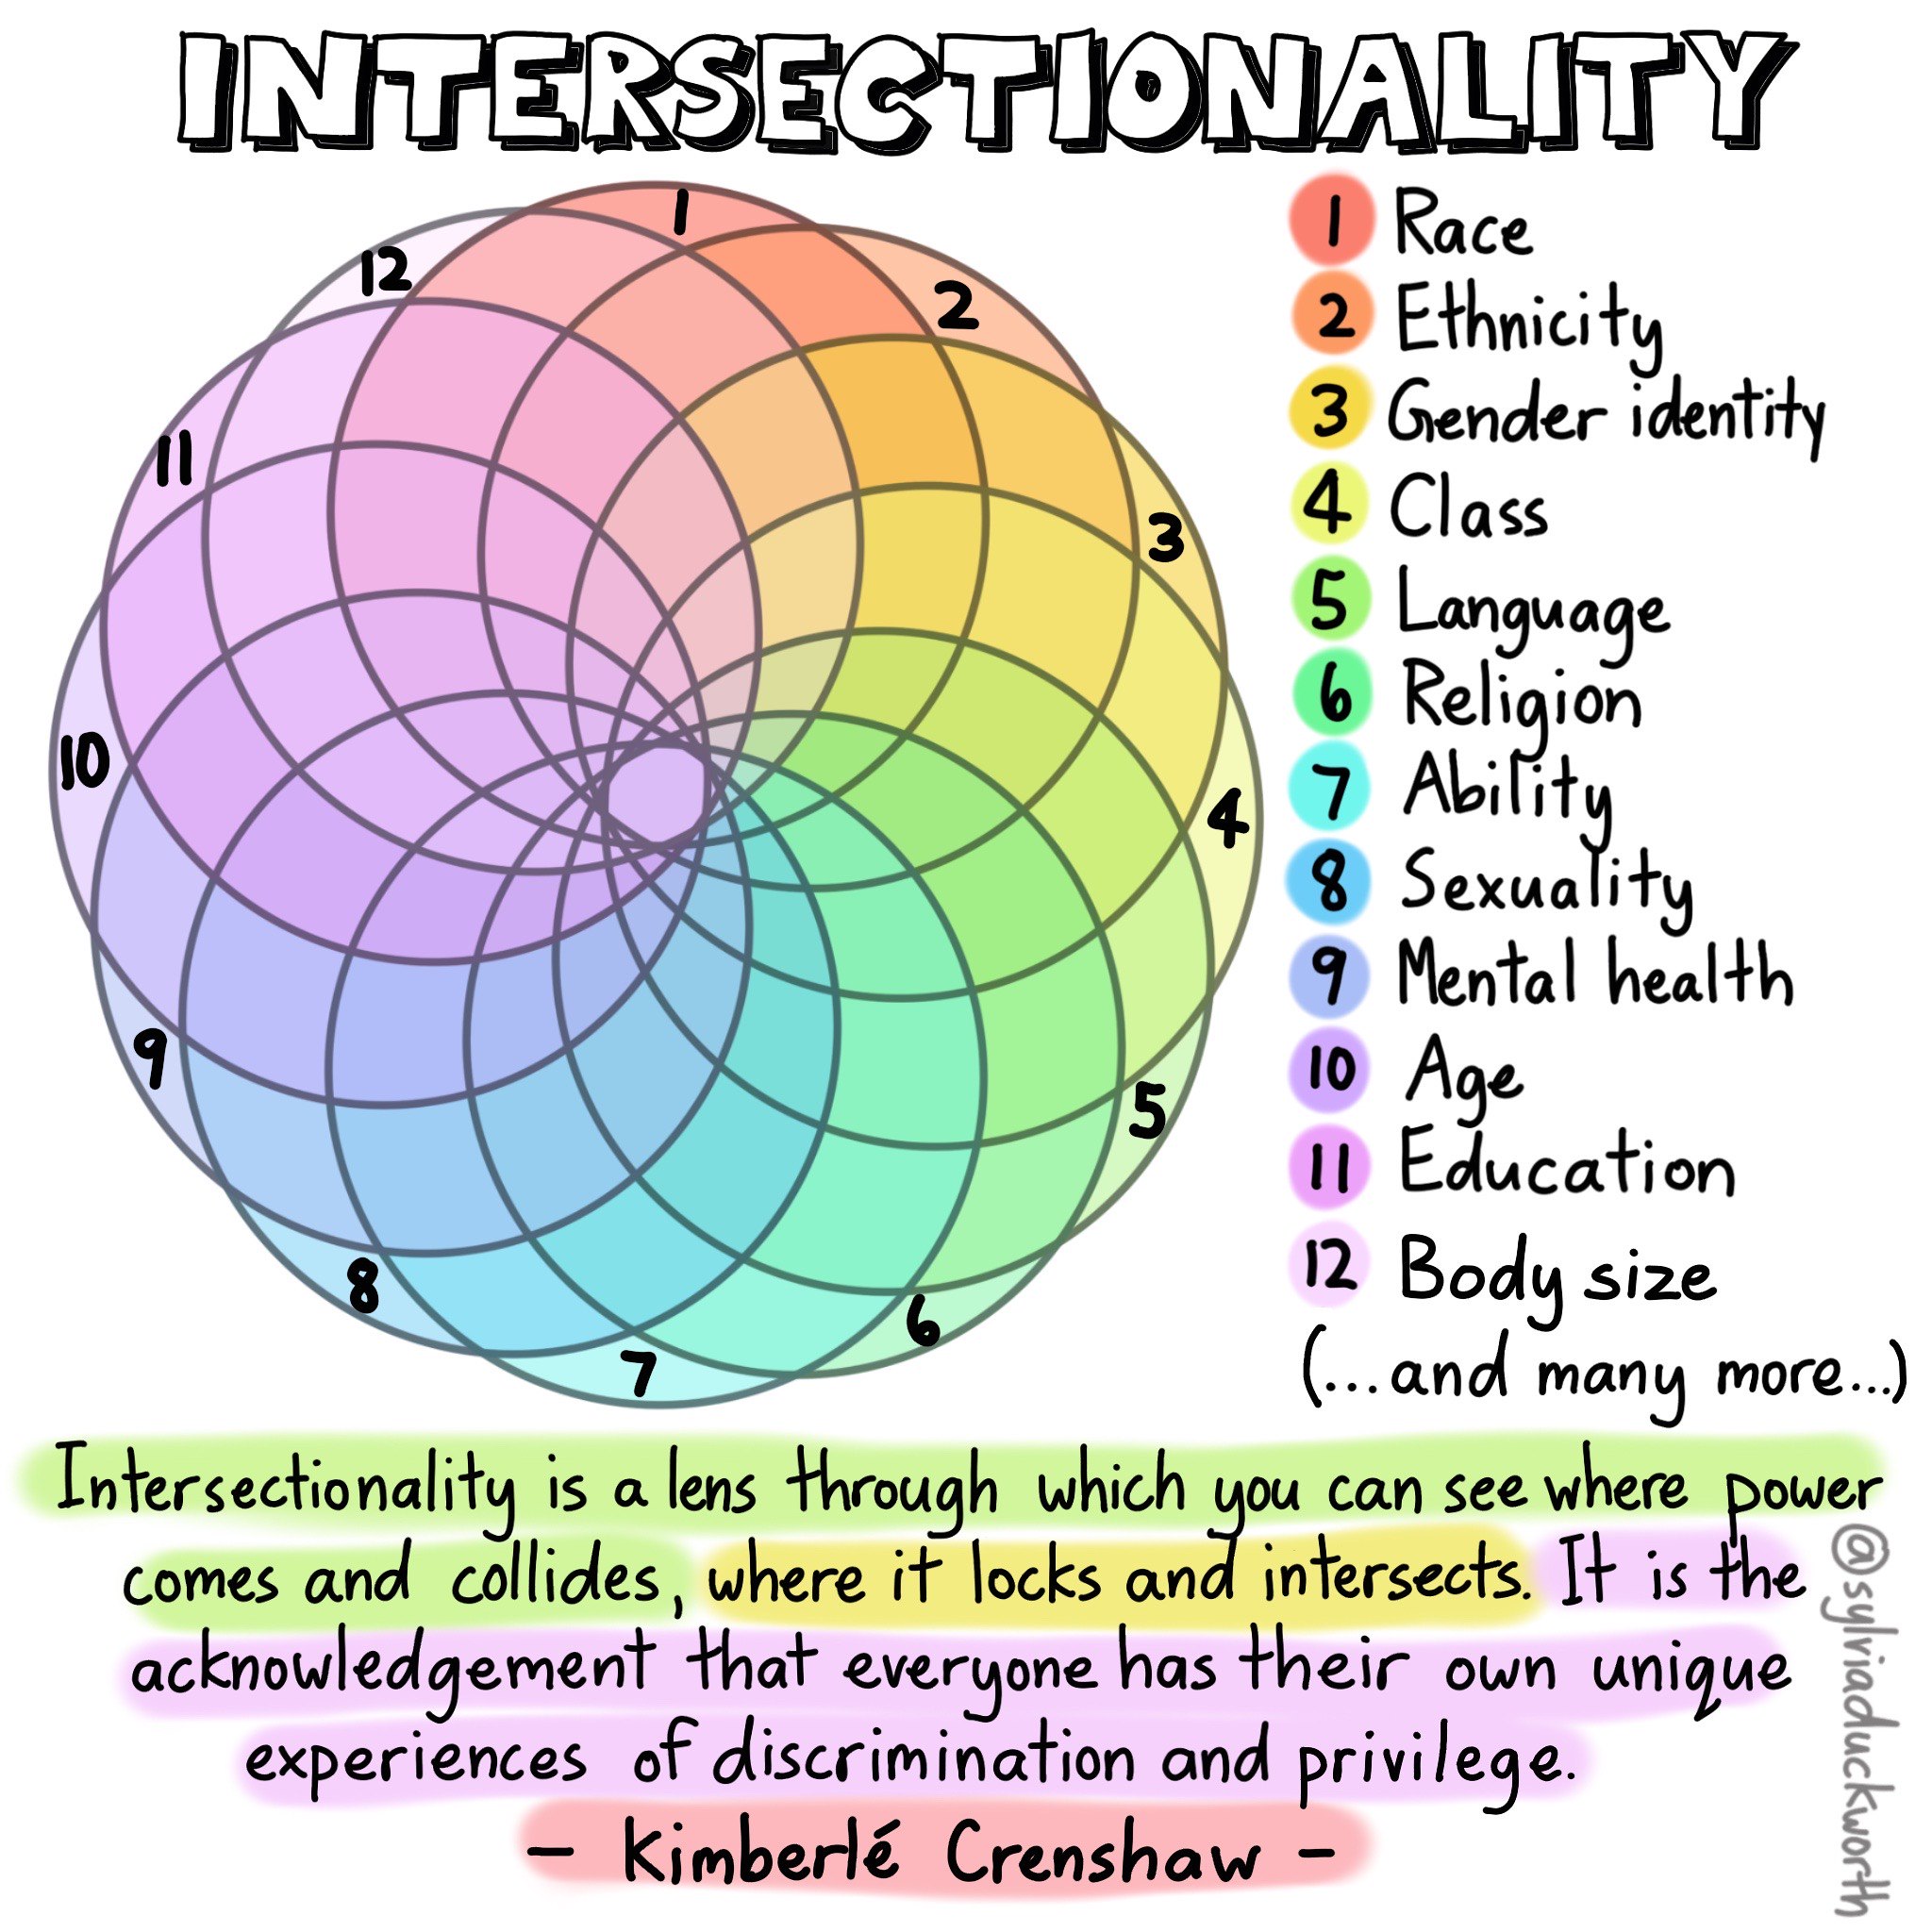 Intersectionality graphic shows overlapping circles representing dimensions of identity, illustrated by Sylvia Duckworth